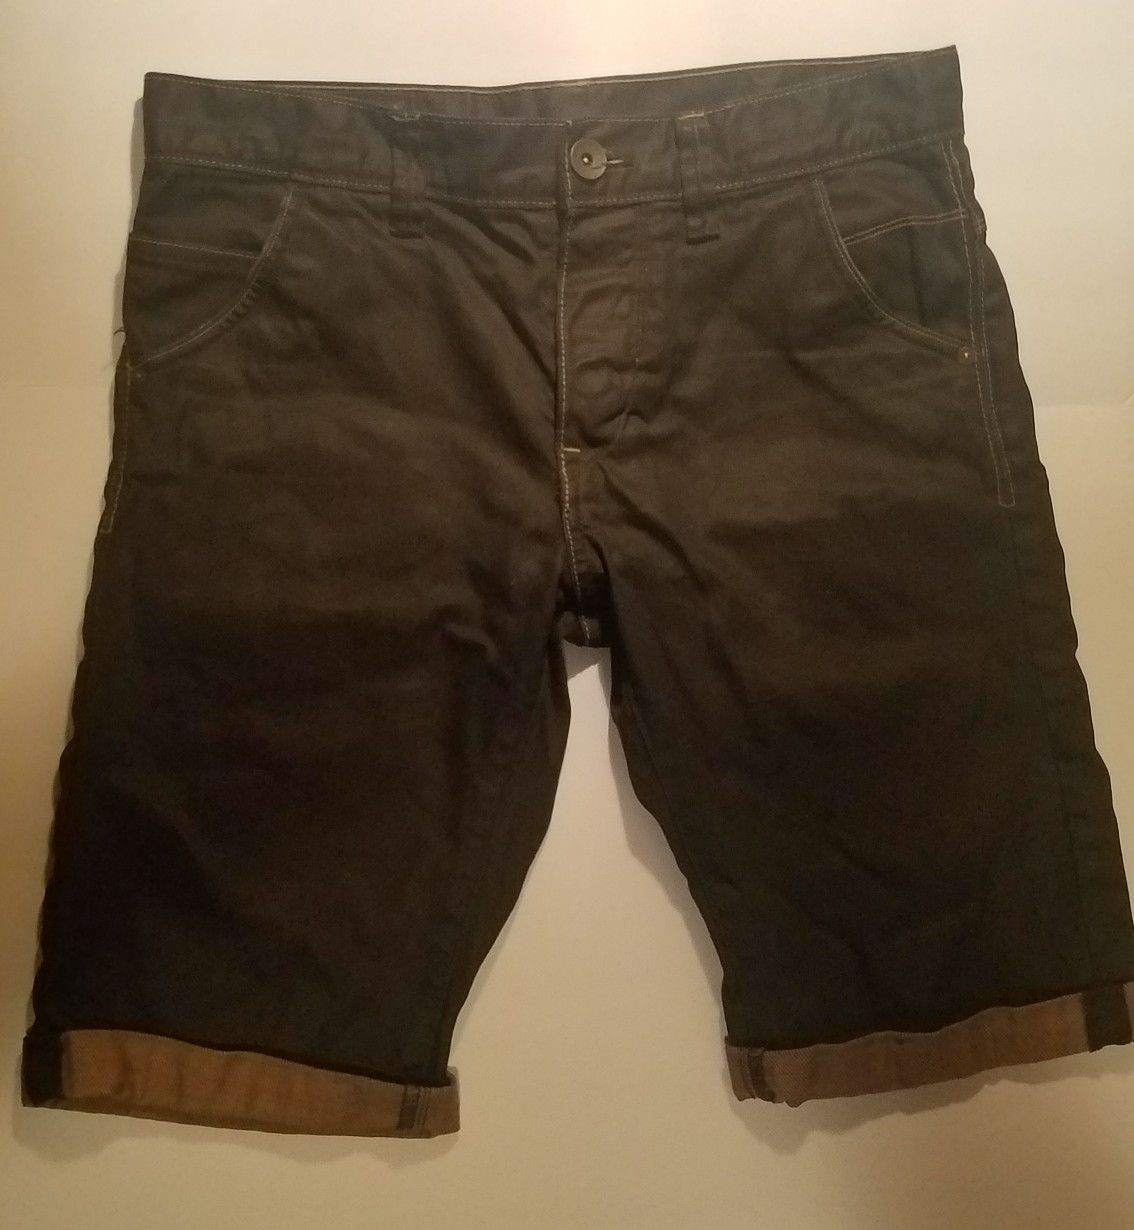 H&M Size 28 Mens Shorts for Sale in Denton, TX - OfferUp